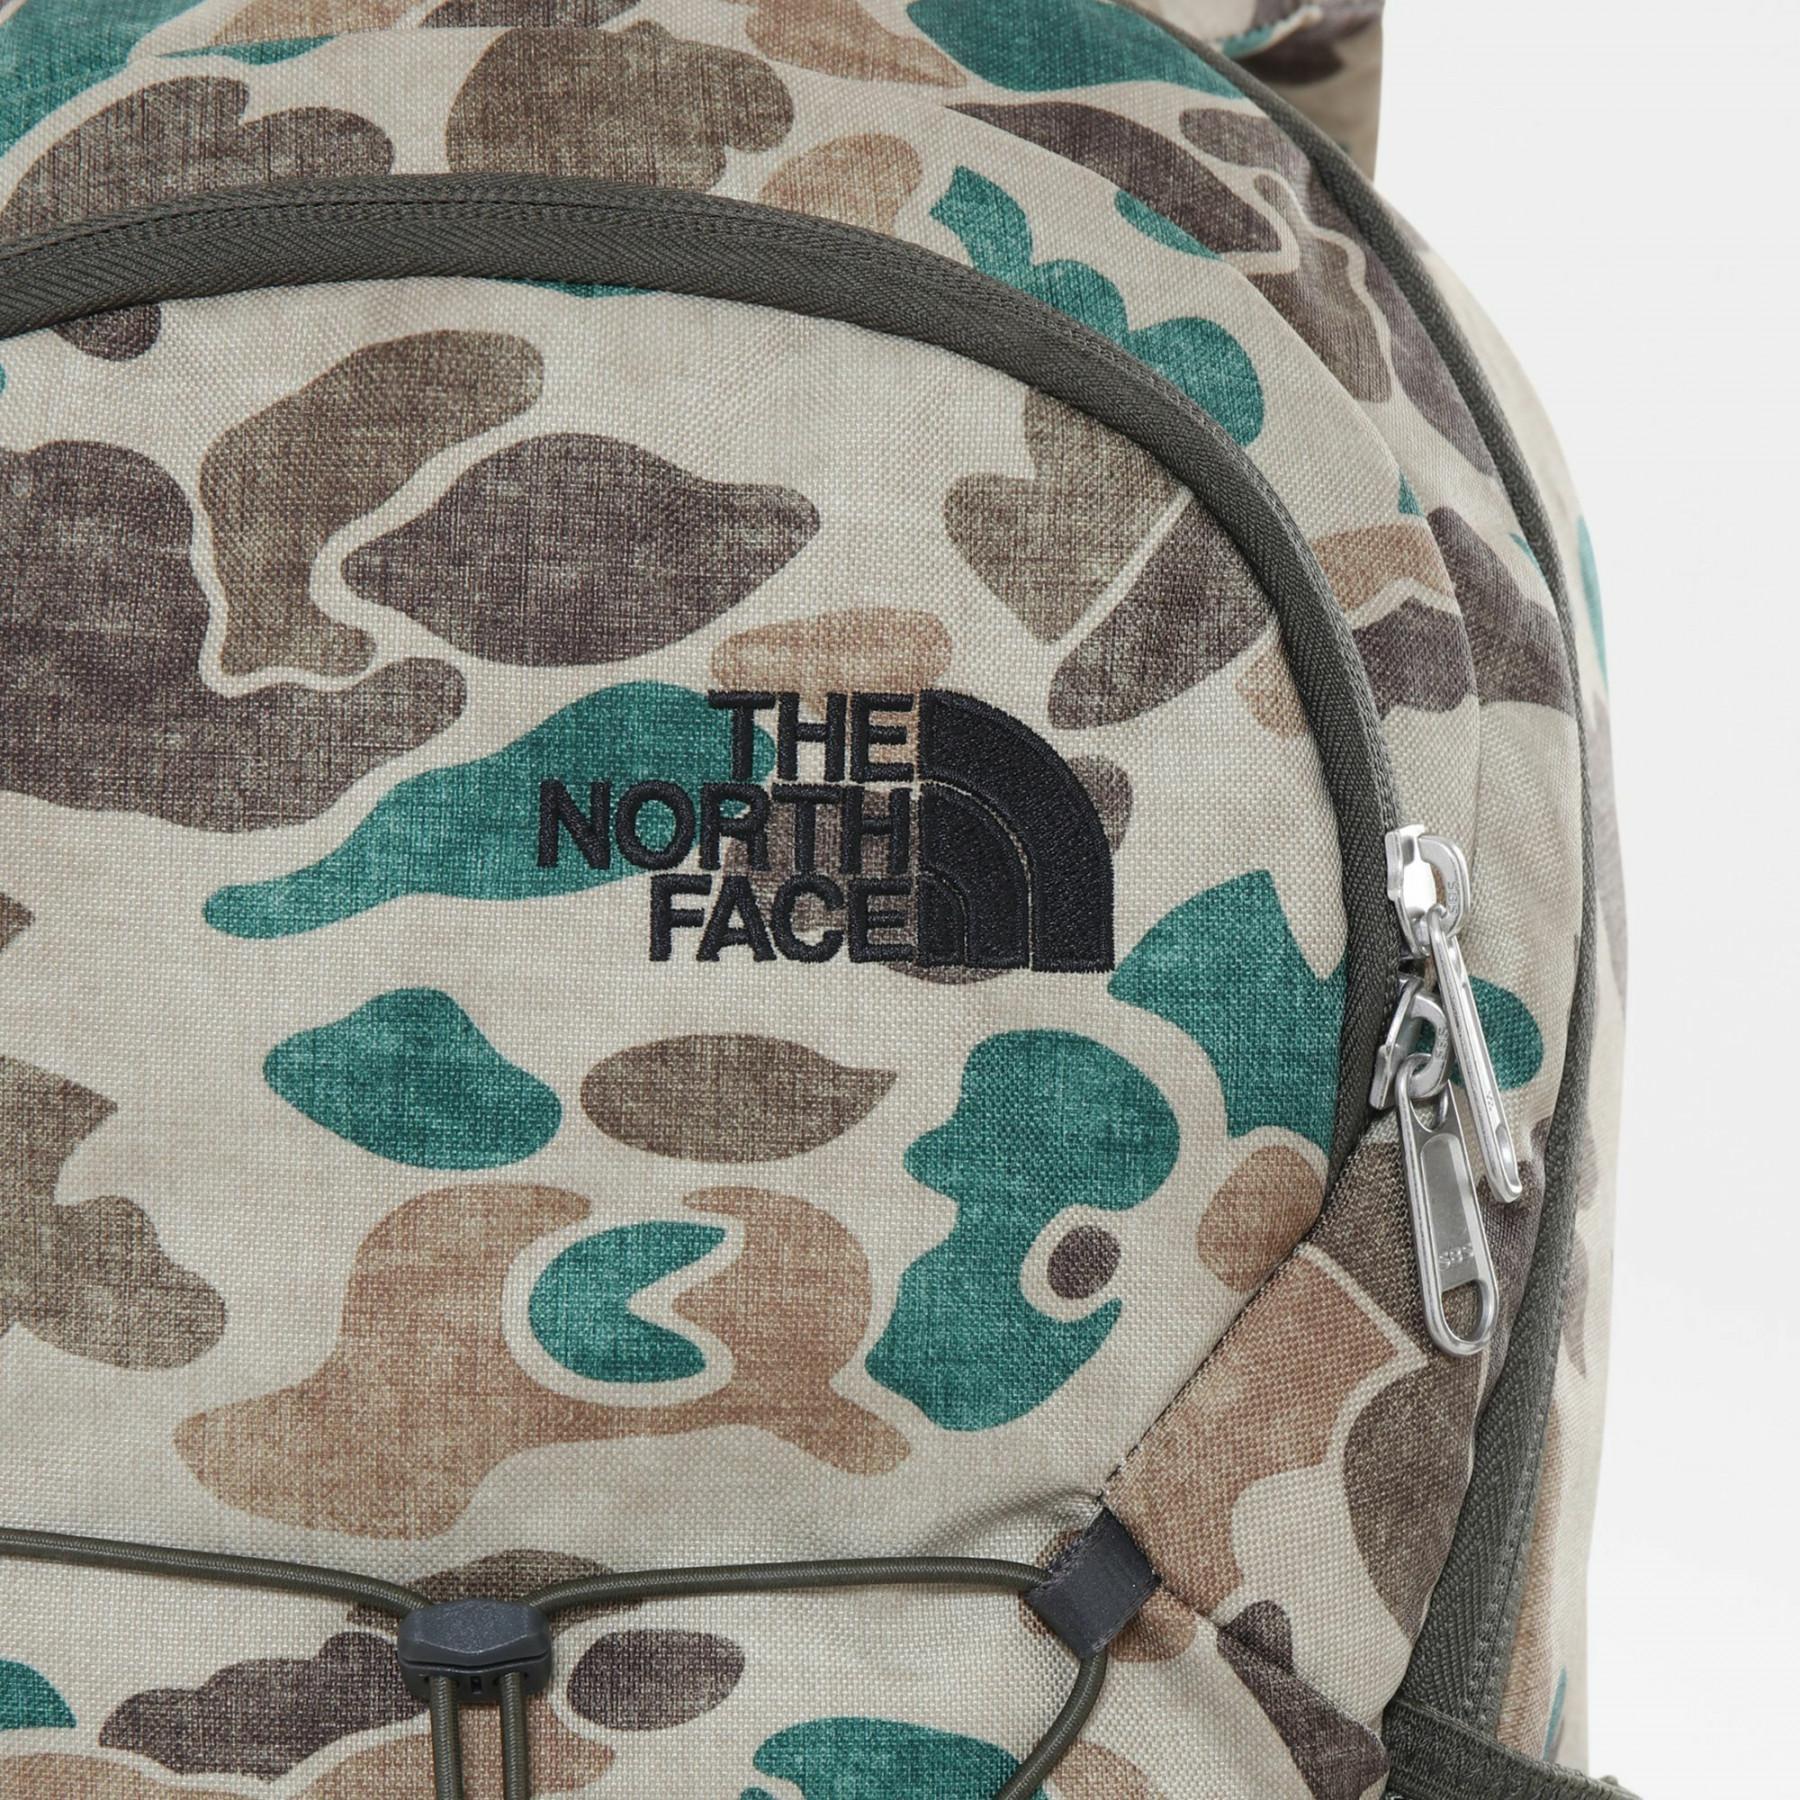 Mochila The North Face Rodey